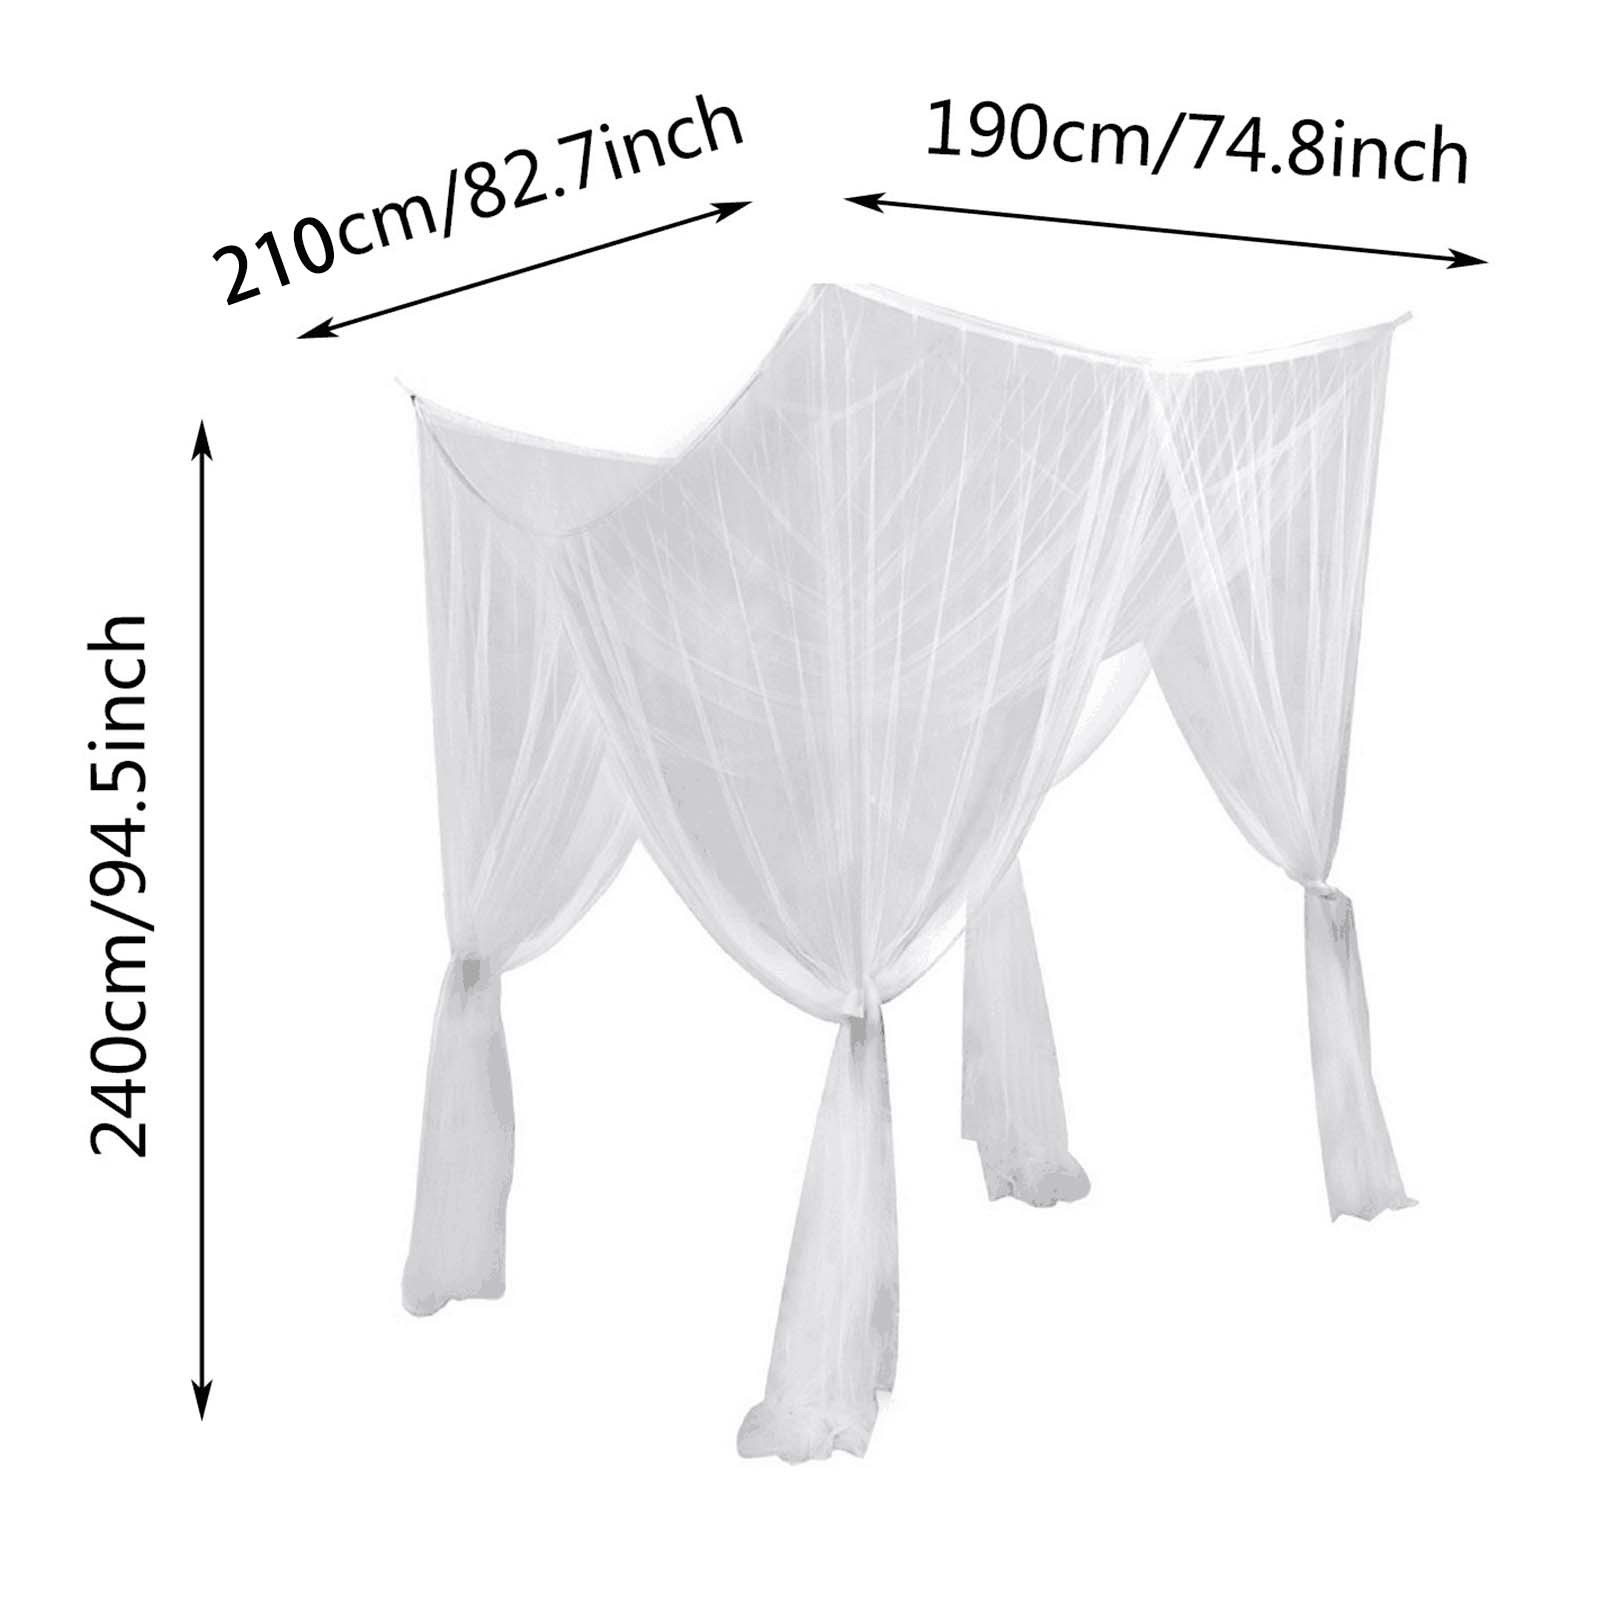 Large Mosquito Net Palace Four Door Net Curtain For Queen/King Bed And Cribs White Elastic Home Prevent Insect Square Canopy Net